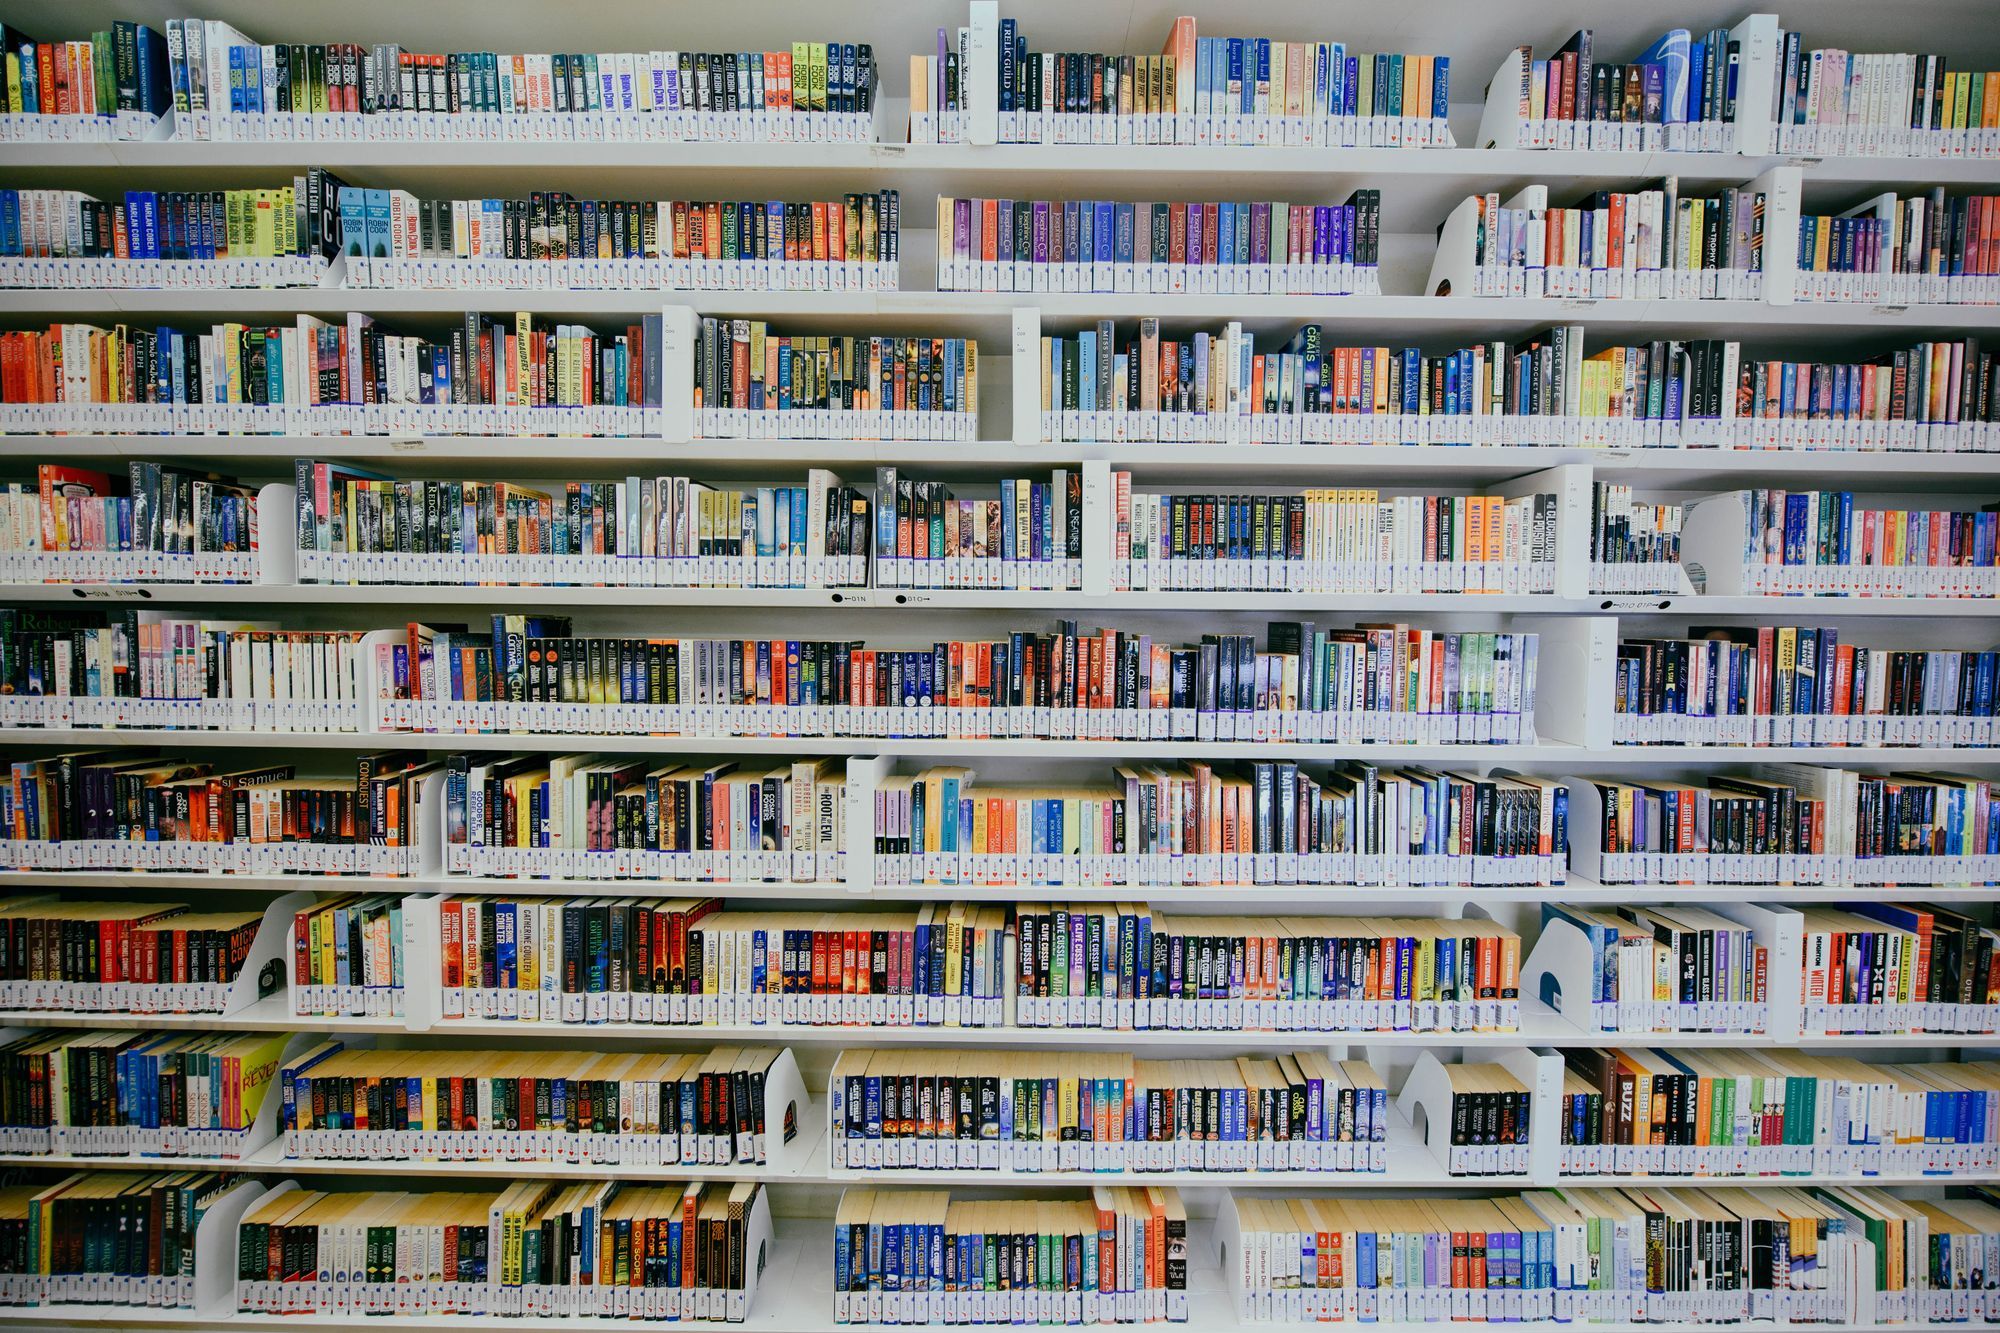 How I went overboard cataloging my library